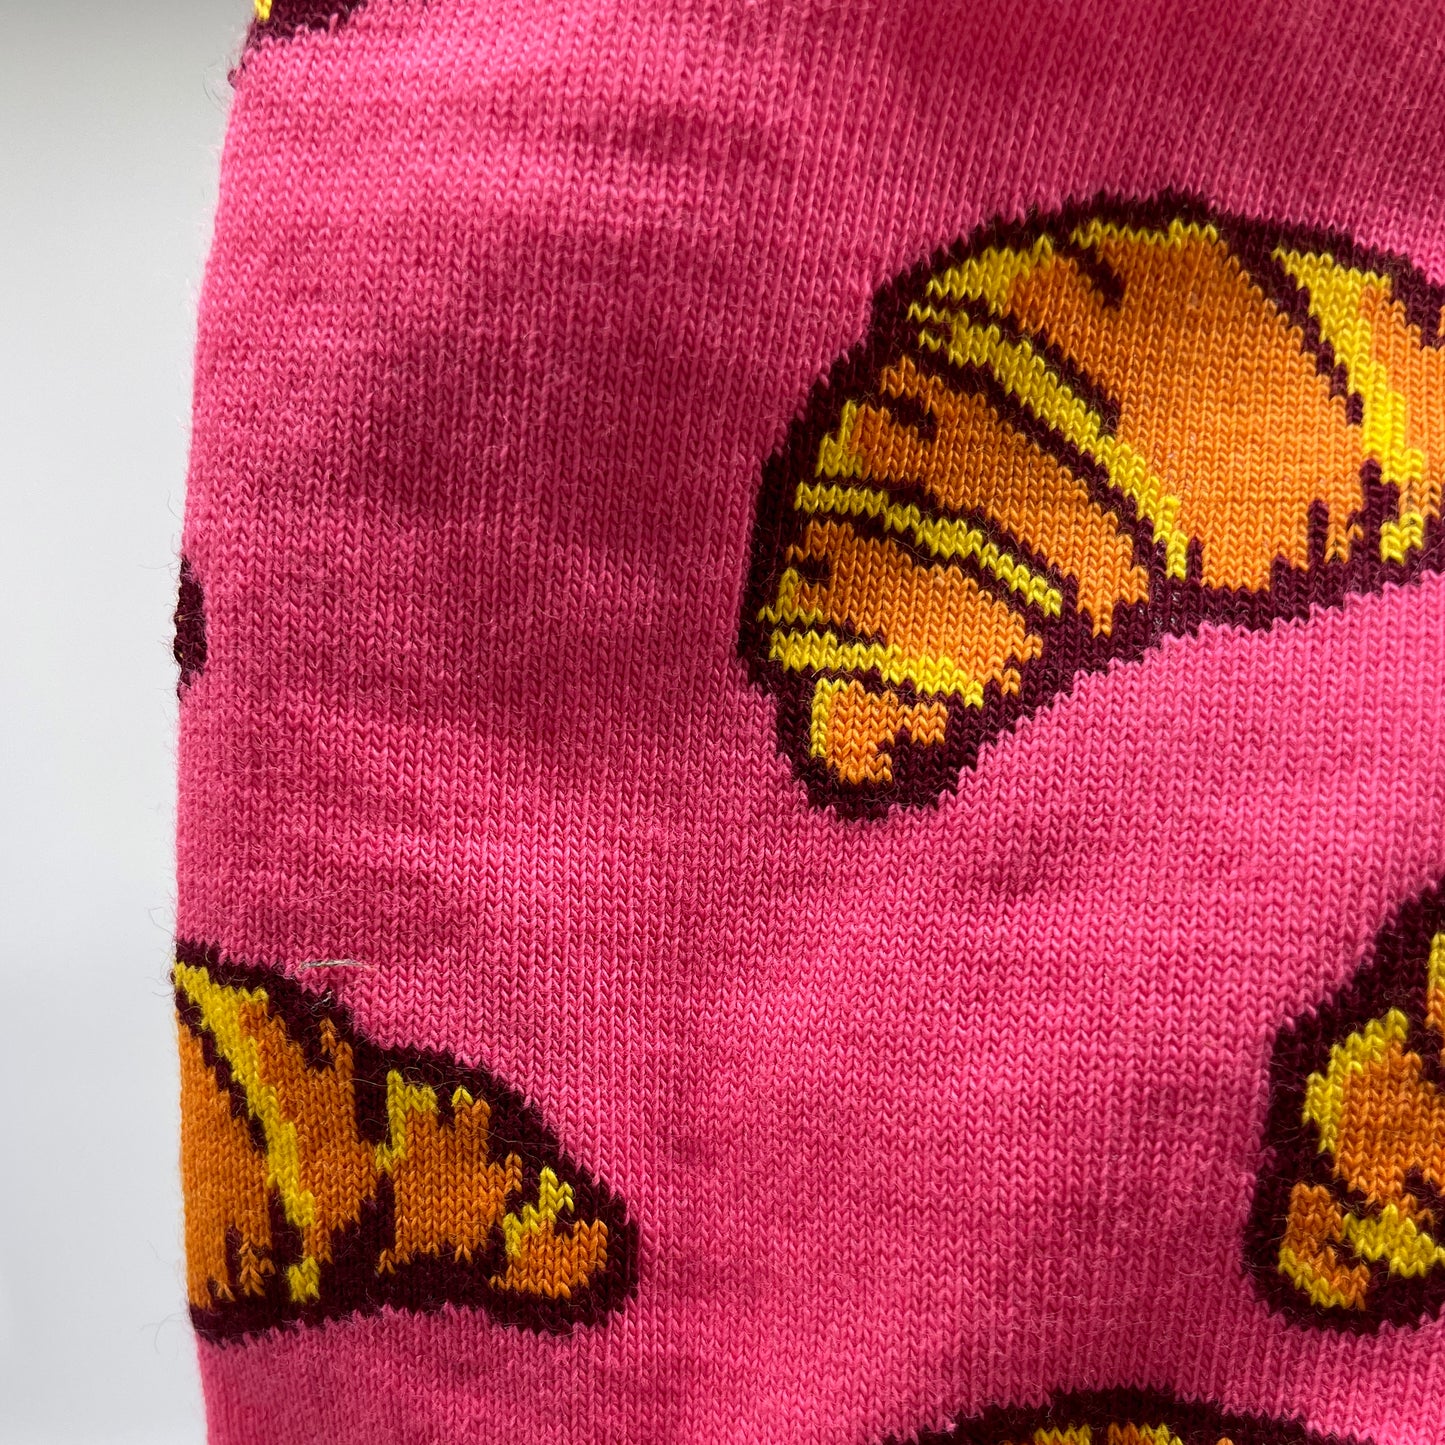 A close-up photo shows a croissant pattern woven into pink organic cotton socks.